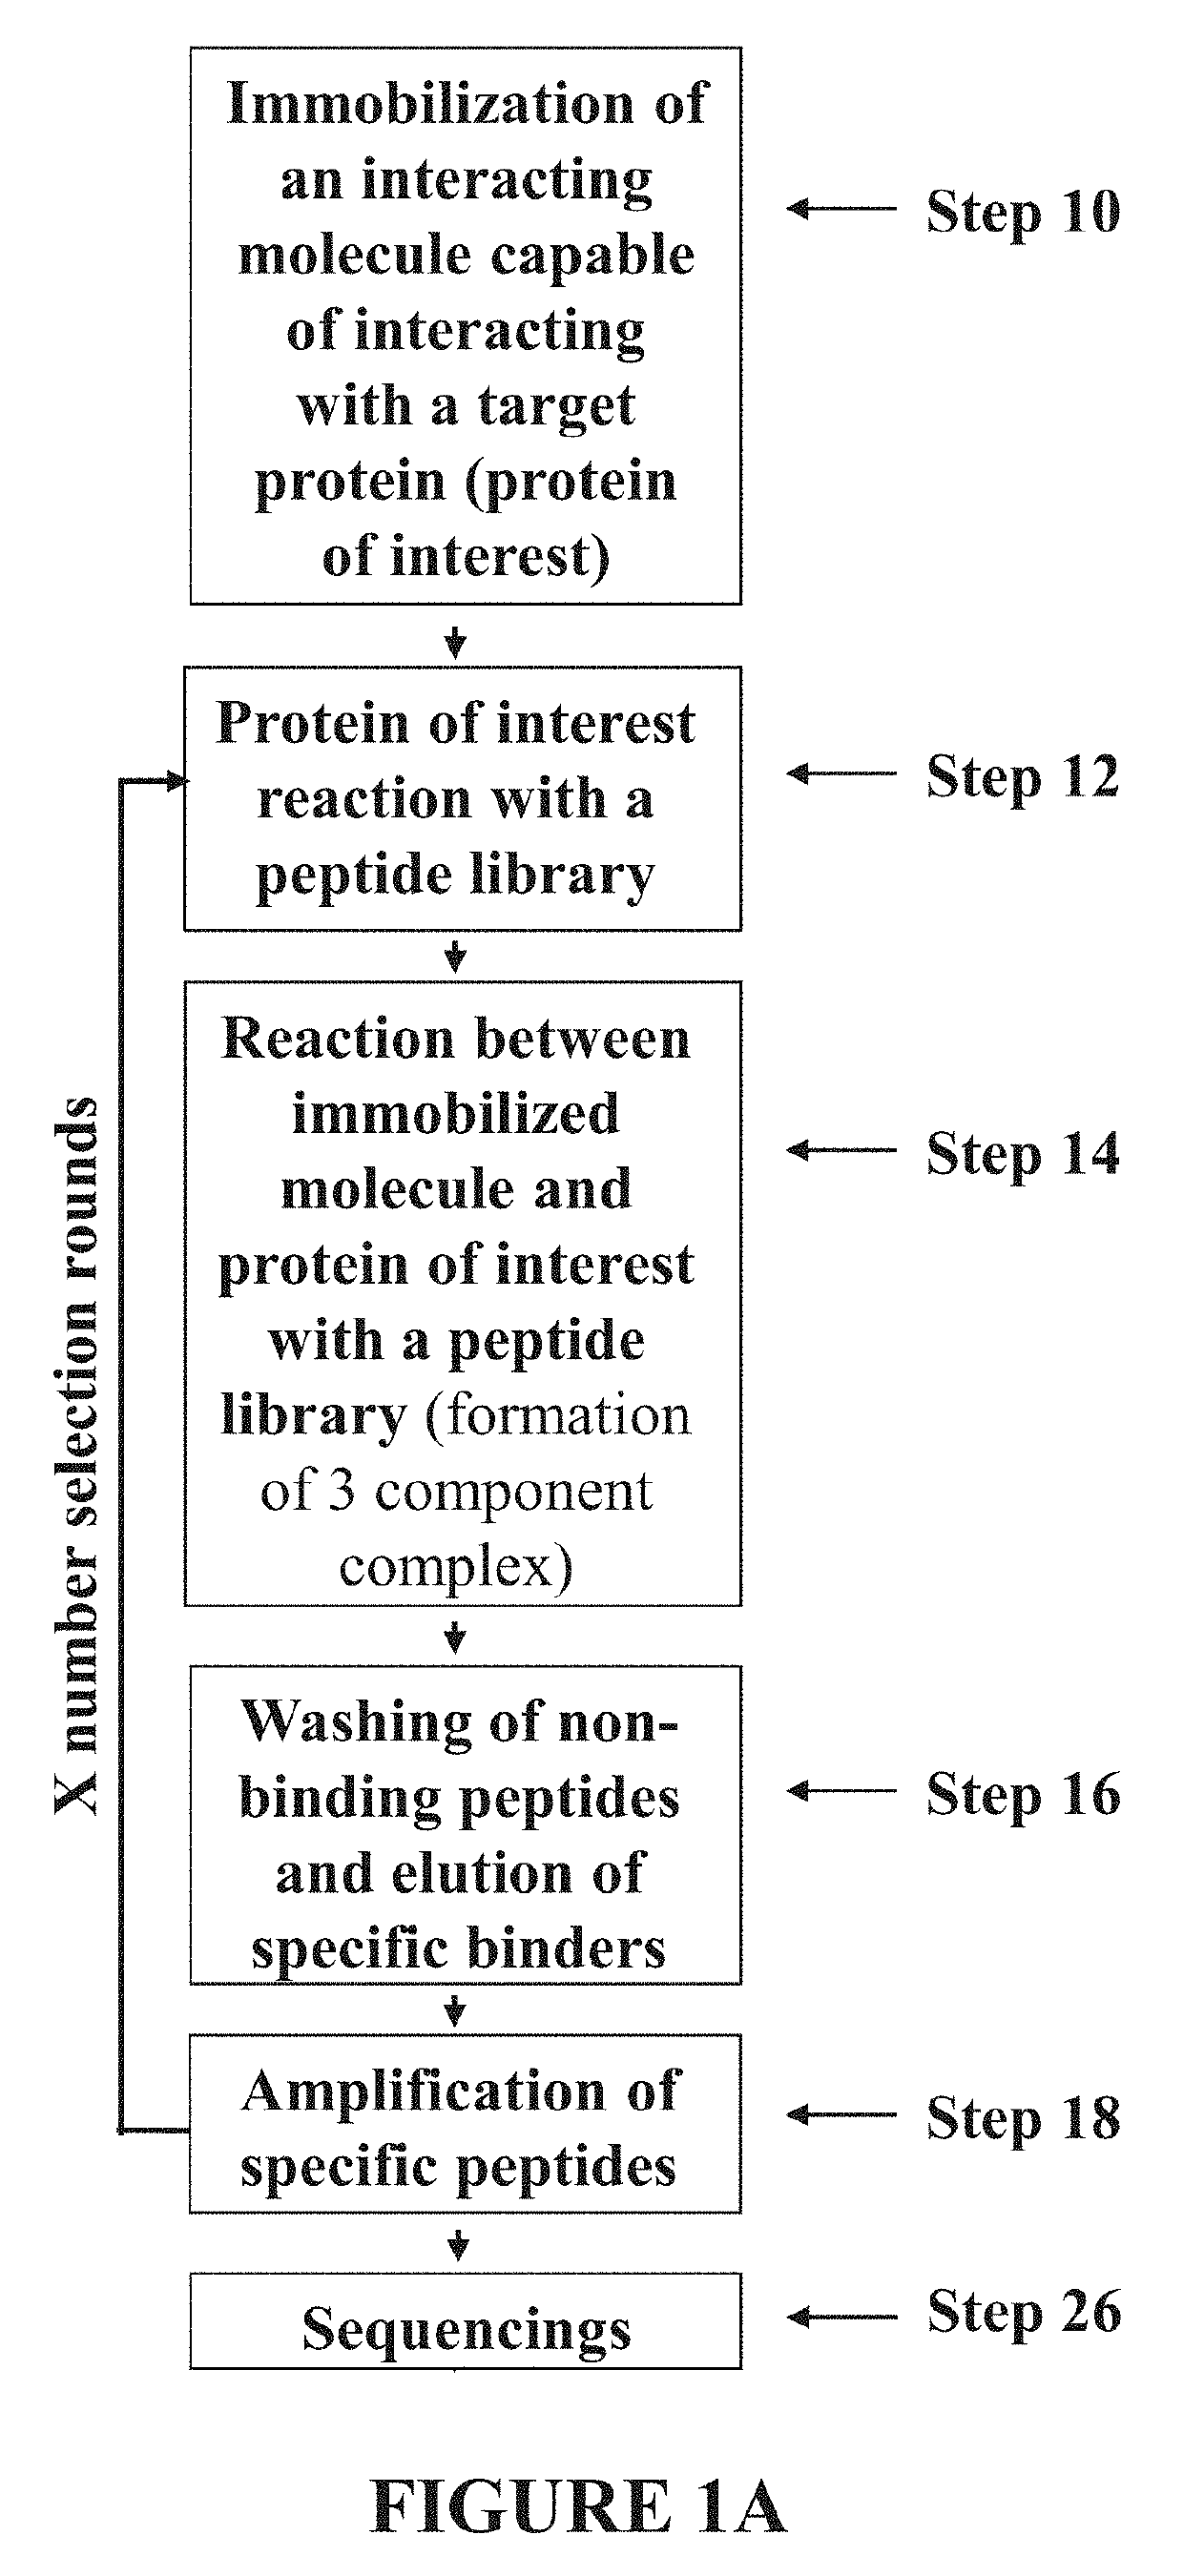 PEPTIDES CAPABLE OF REACTIVATING p53 MUTANTS